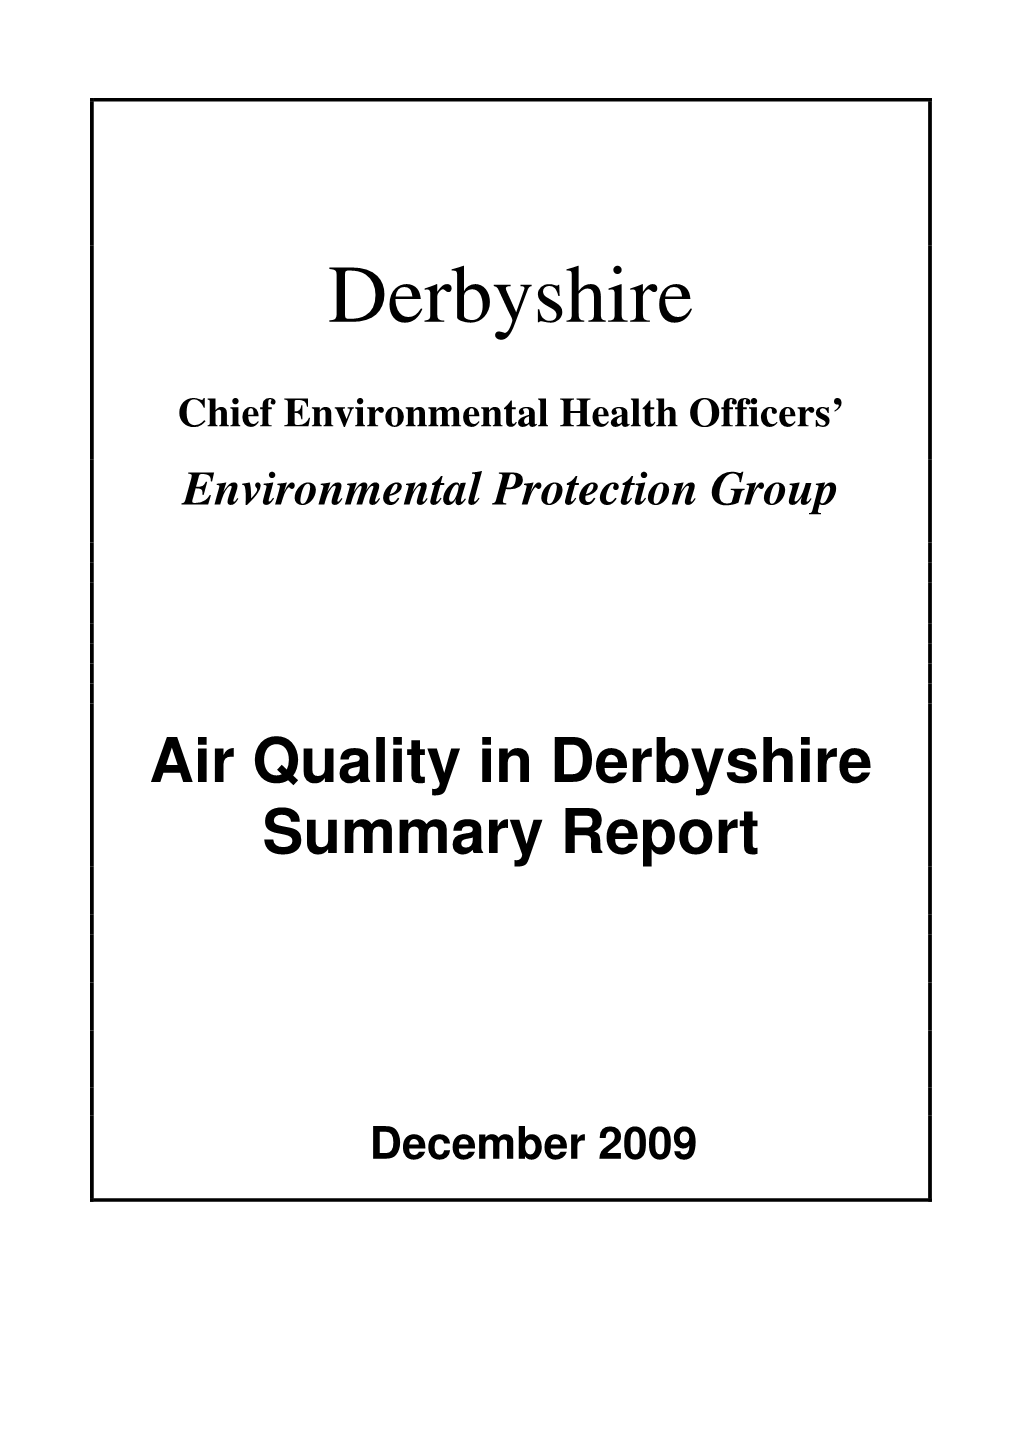 Chief Environmental Health Officers’ Environmental Protection Group